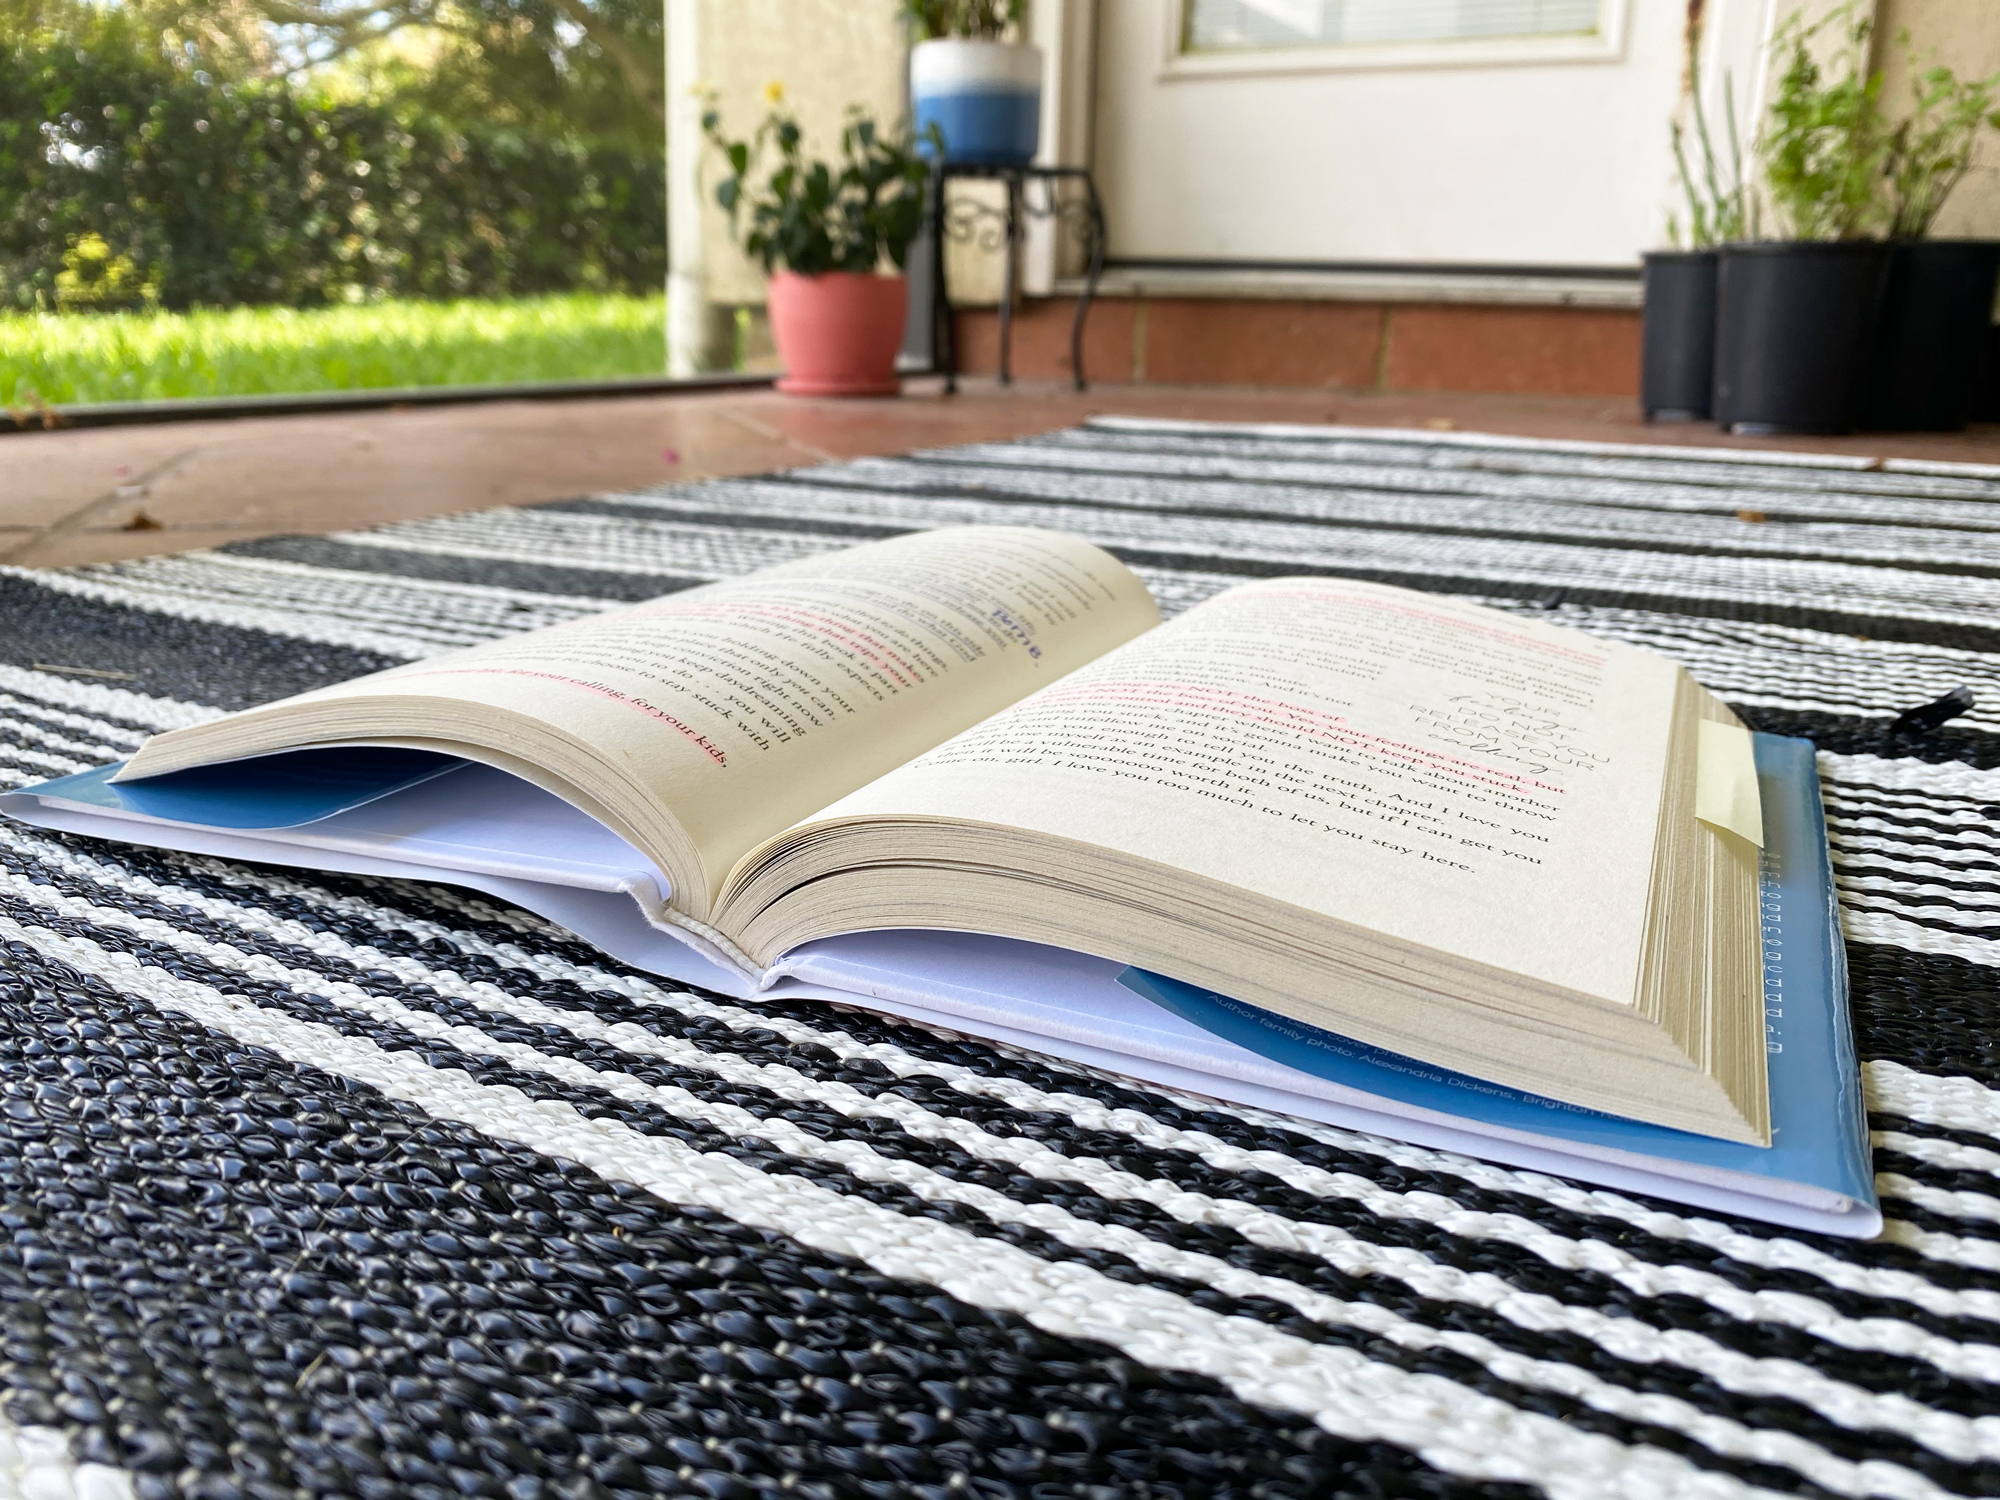 Looking for ways to connect with your community while quarantine and social distancing? Host a virtual book club with these expert tips.